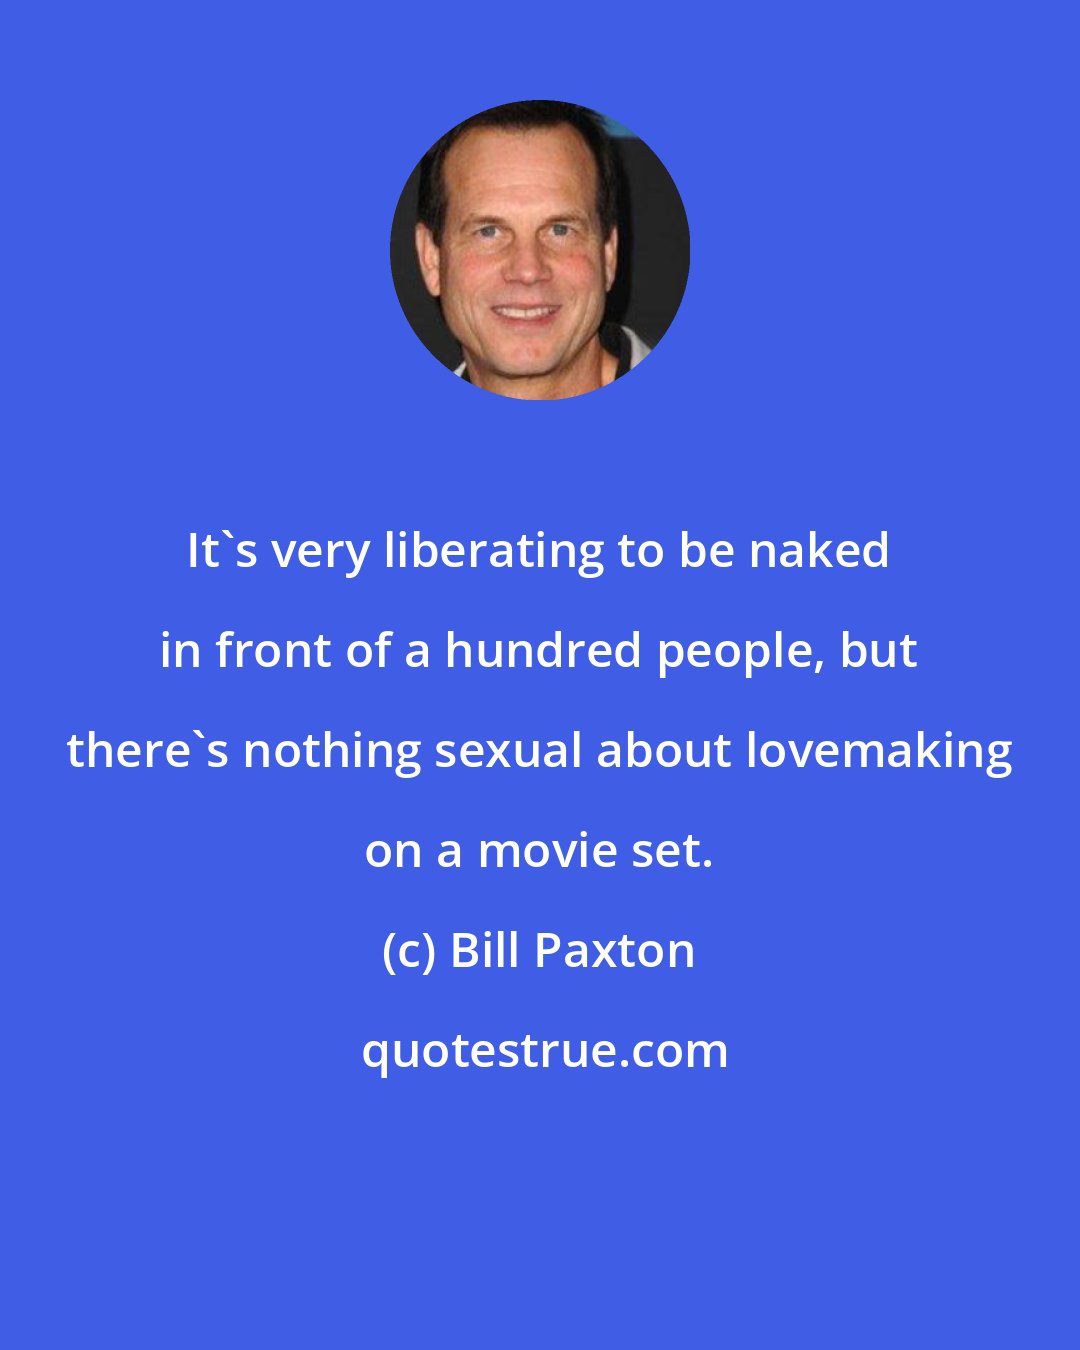 Bill Paxton: It's very liberating to be naked in front of a hundred people, but there's nothing sexual about lovemaking on a movie set.